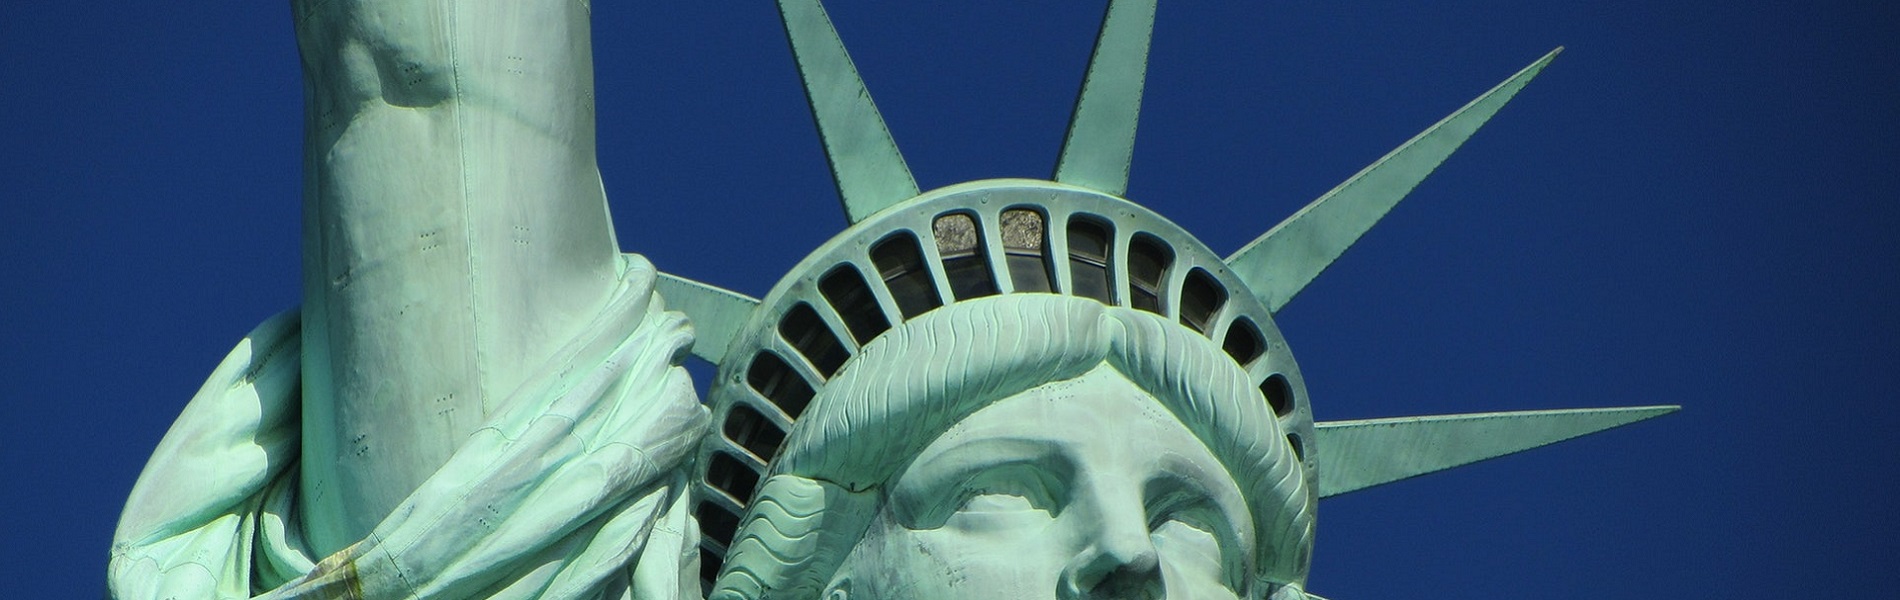 Statue of Liberty against a beautiful blue sky